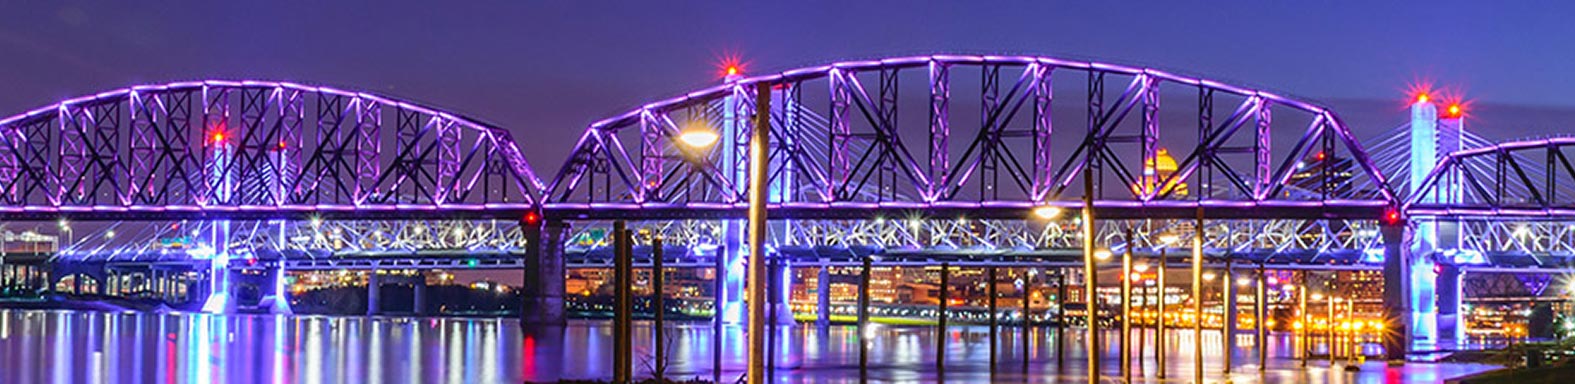 Pictured: A bridge with colorful lights in Indiana.